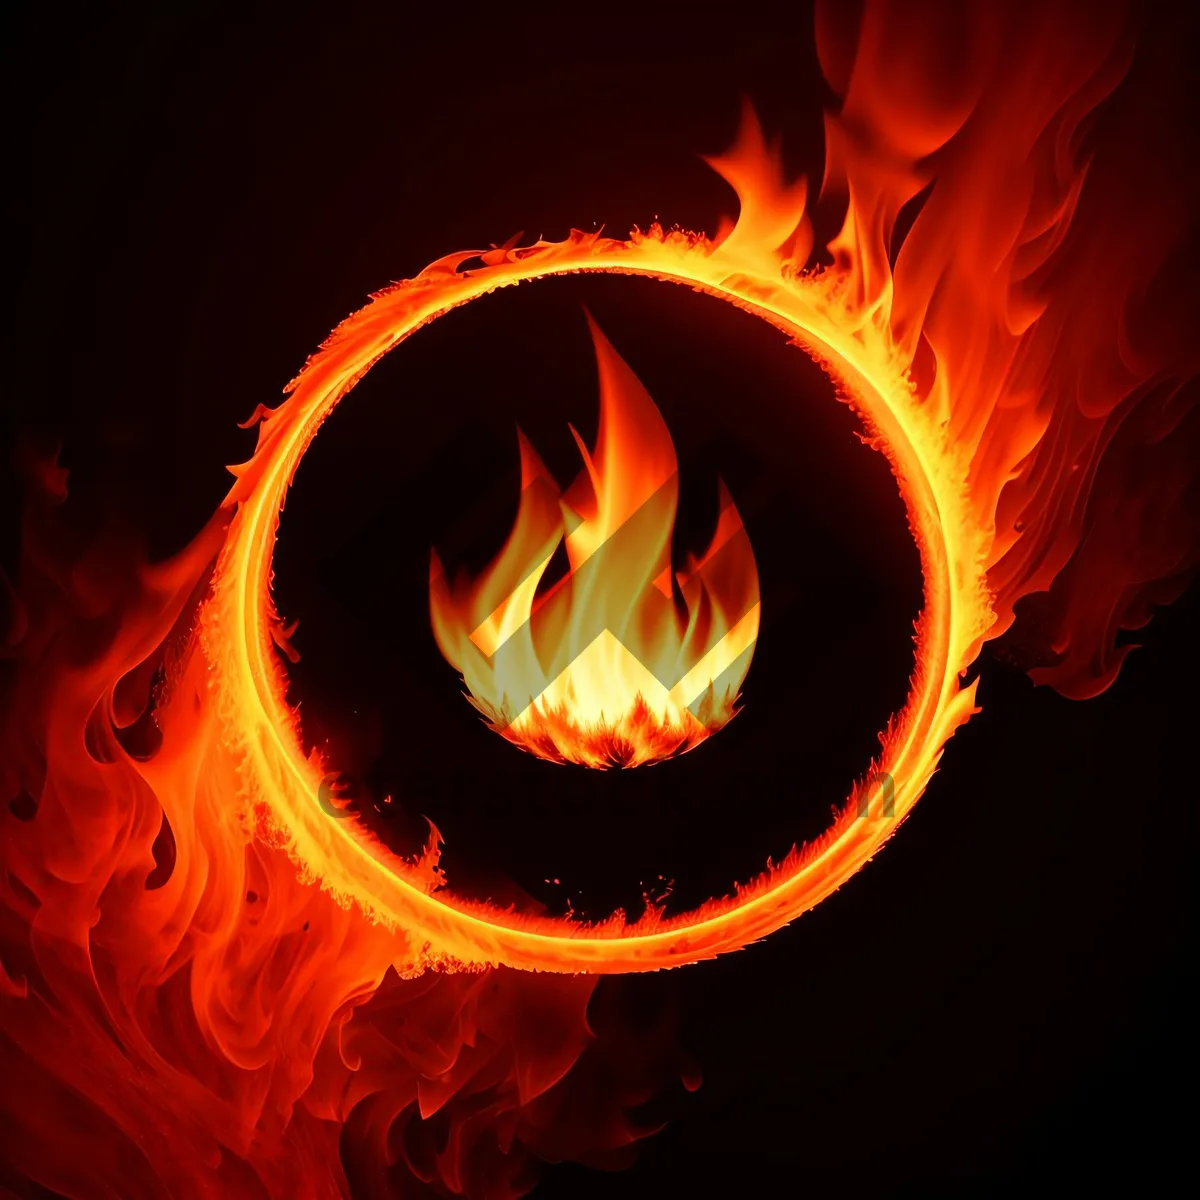 Picture of Fiery Inferno: Blaze of Burning Flames